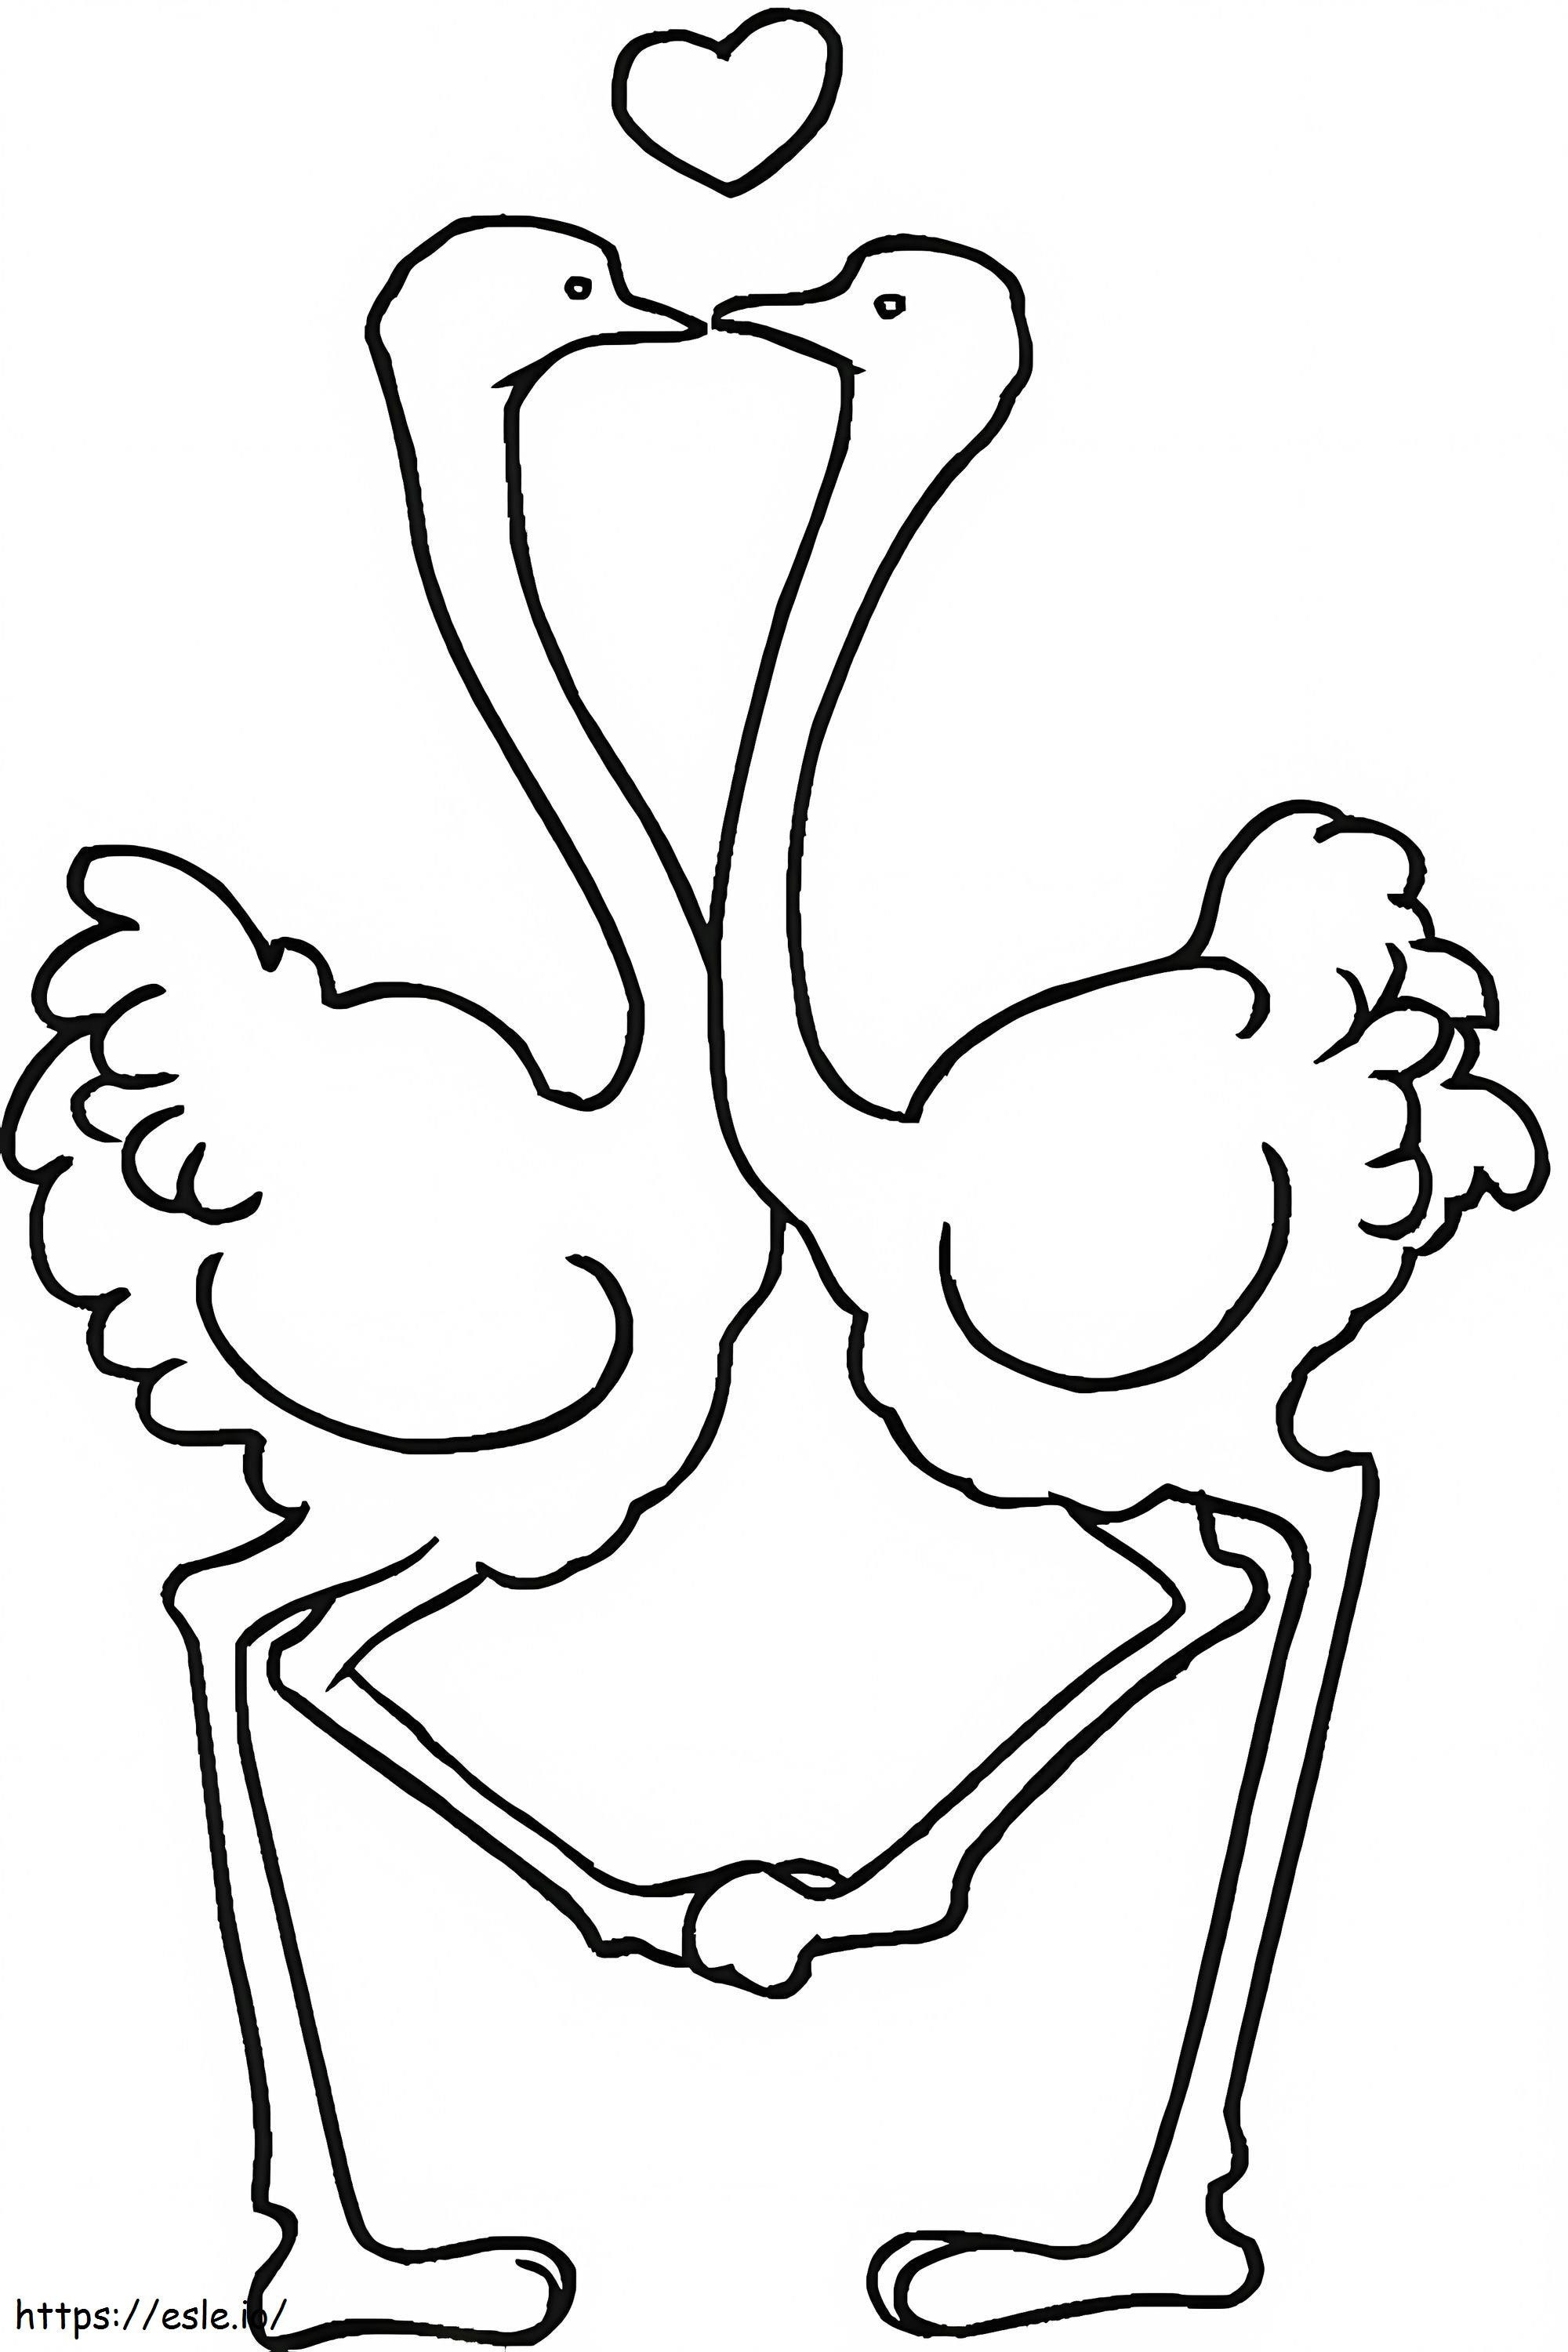 Ostriches In Love coloring page